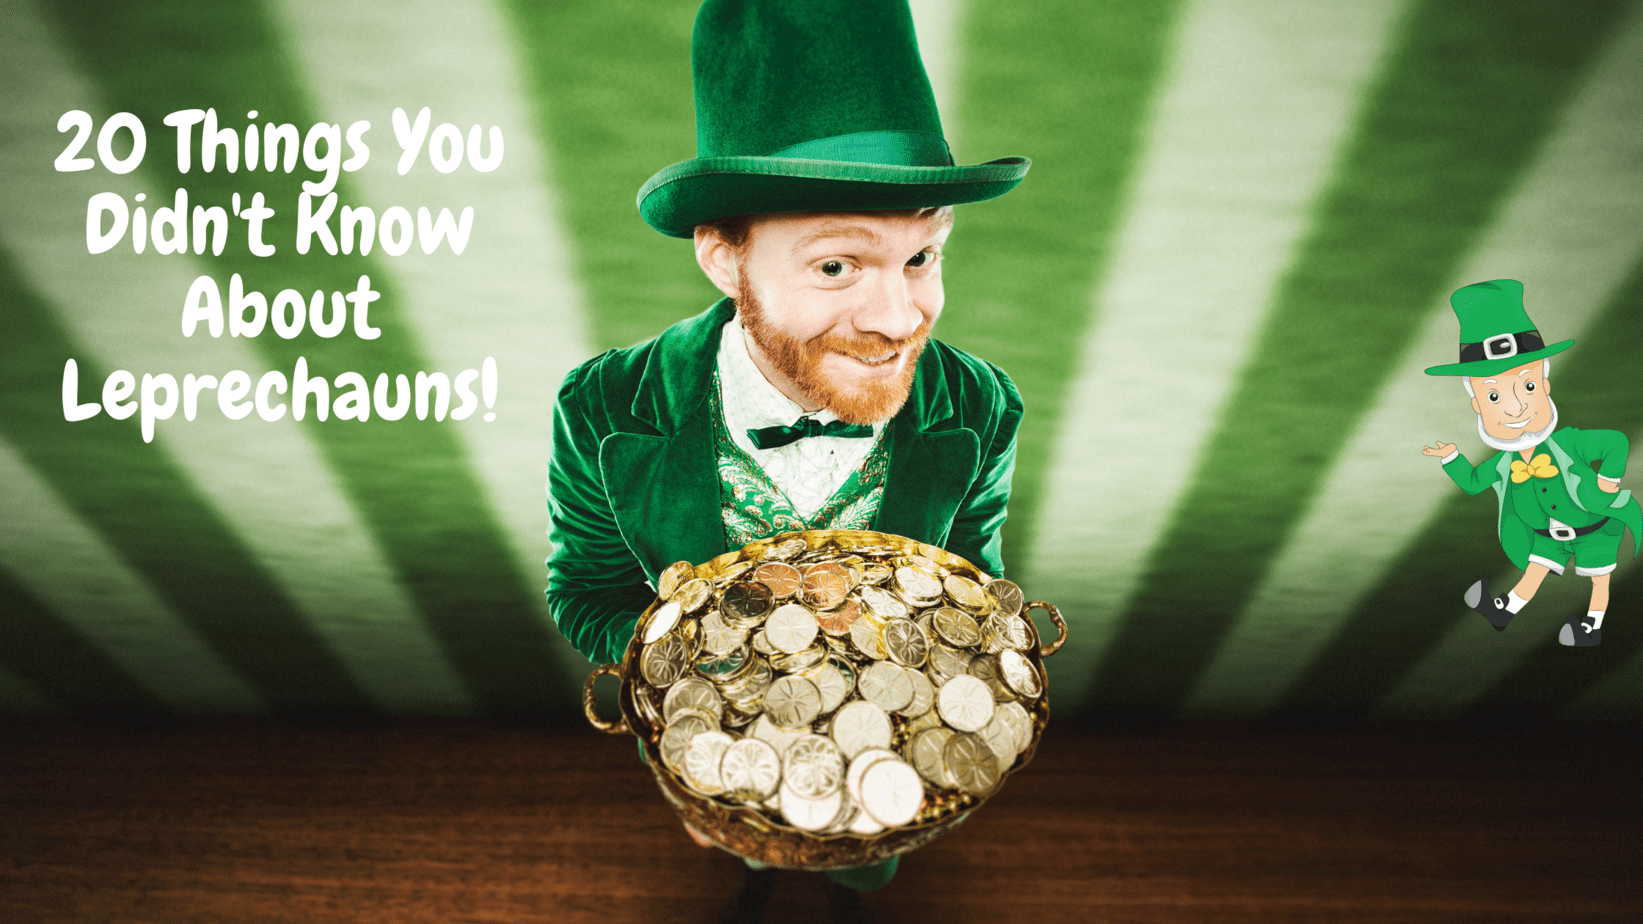 ☘️ 20 things you didn't know about Leprechauns 